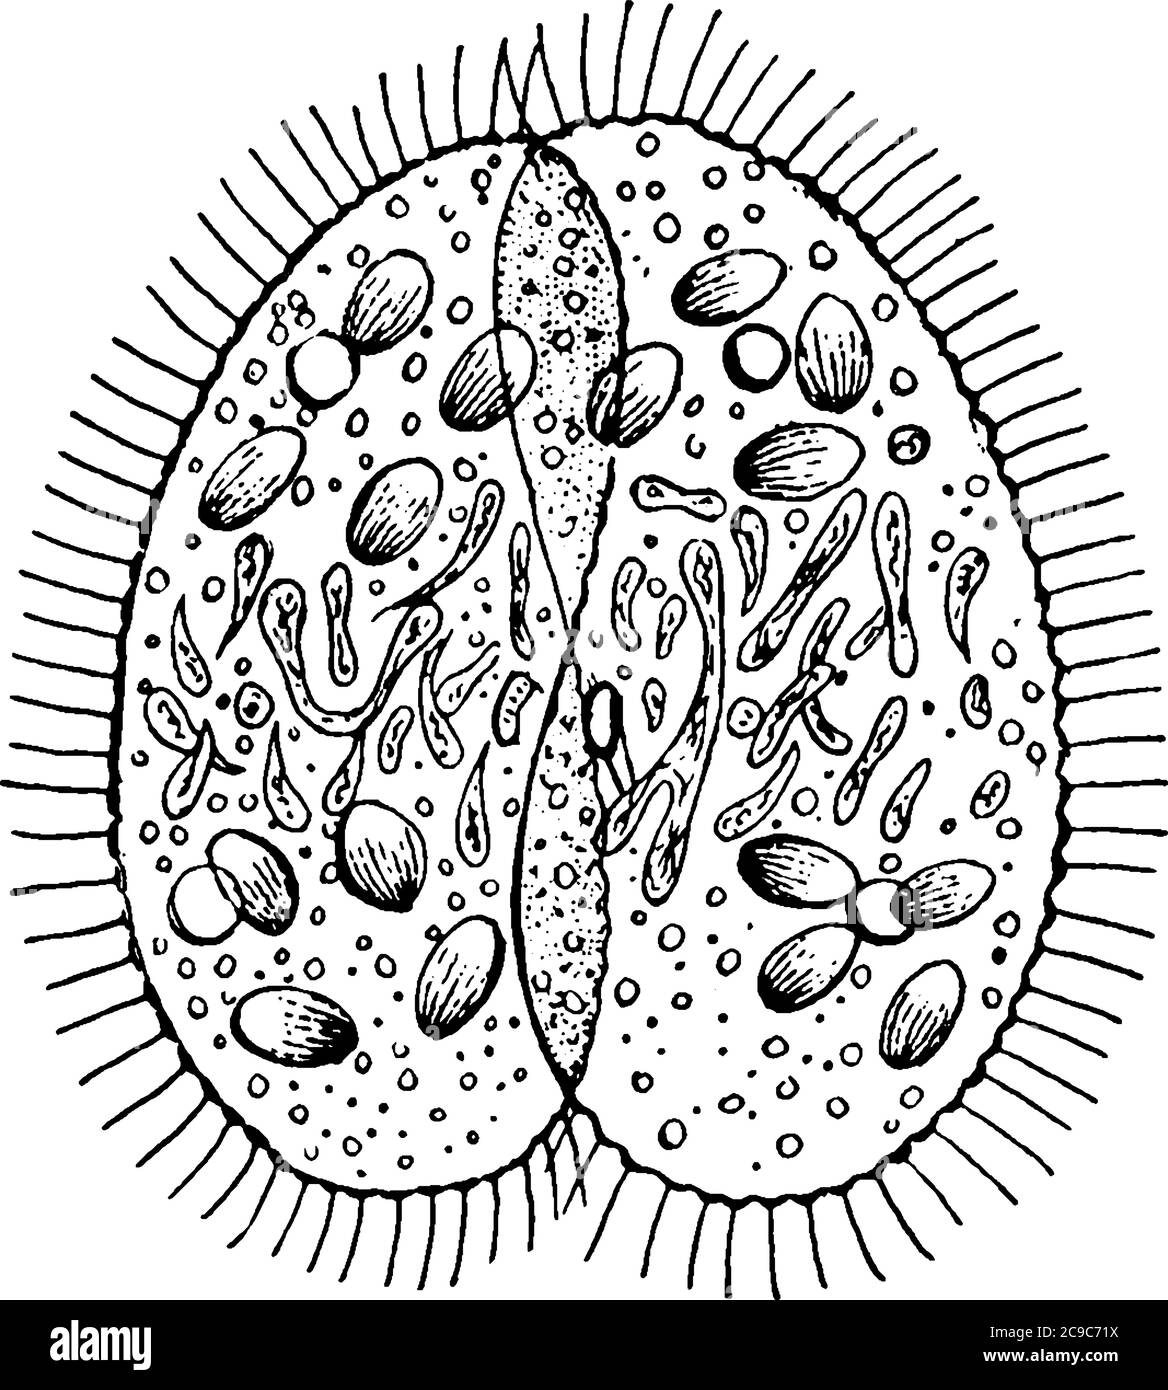 Paramecium, a one-celled ciliate in the Kingdom Protista. These two are separating after conjugation, vintage line drawing or engraving illustration. Stock Vector